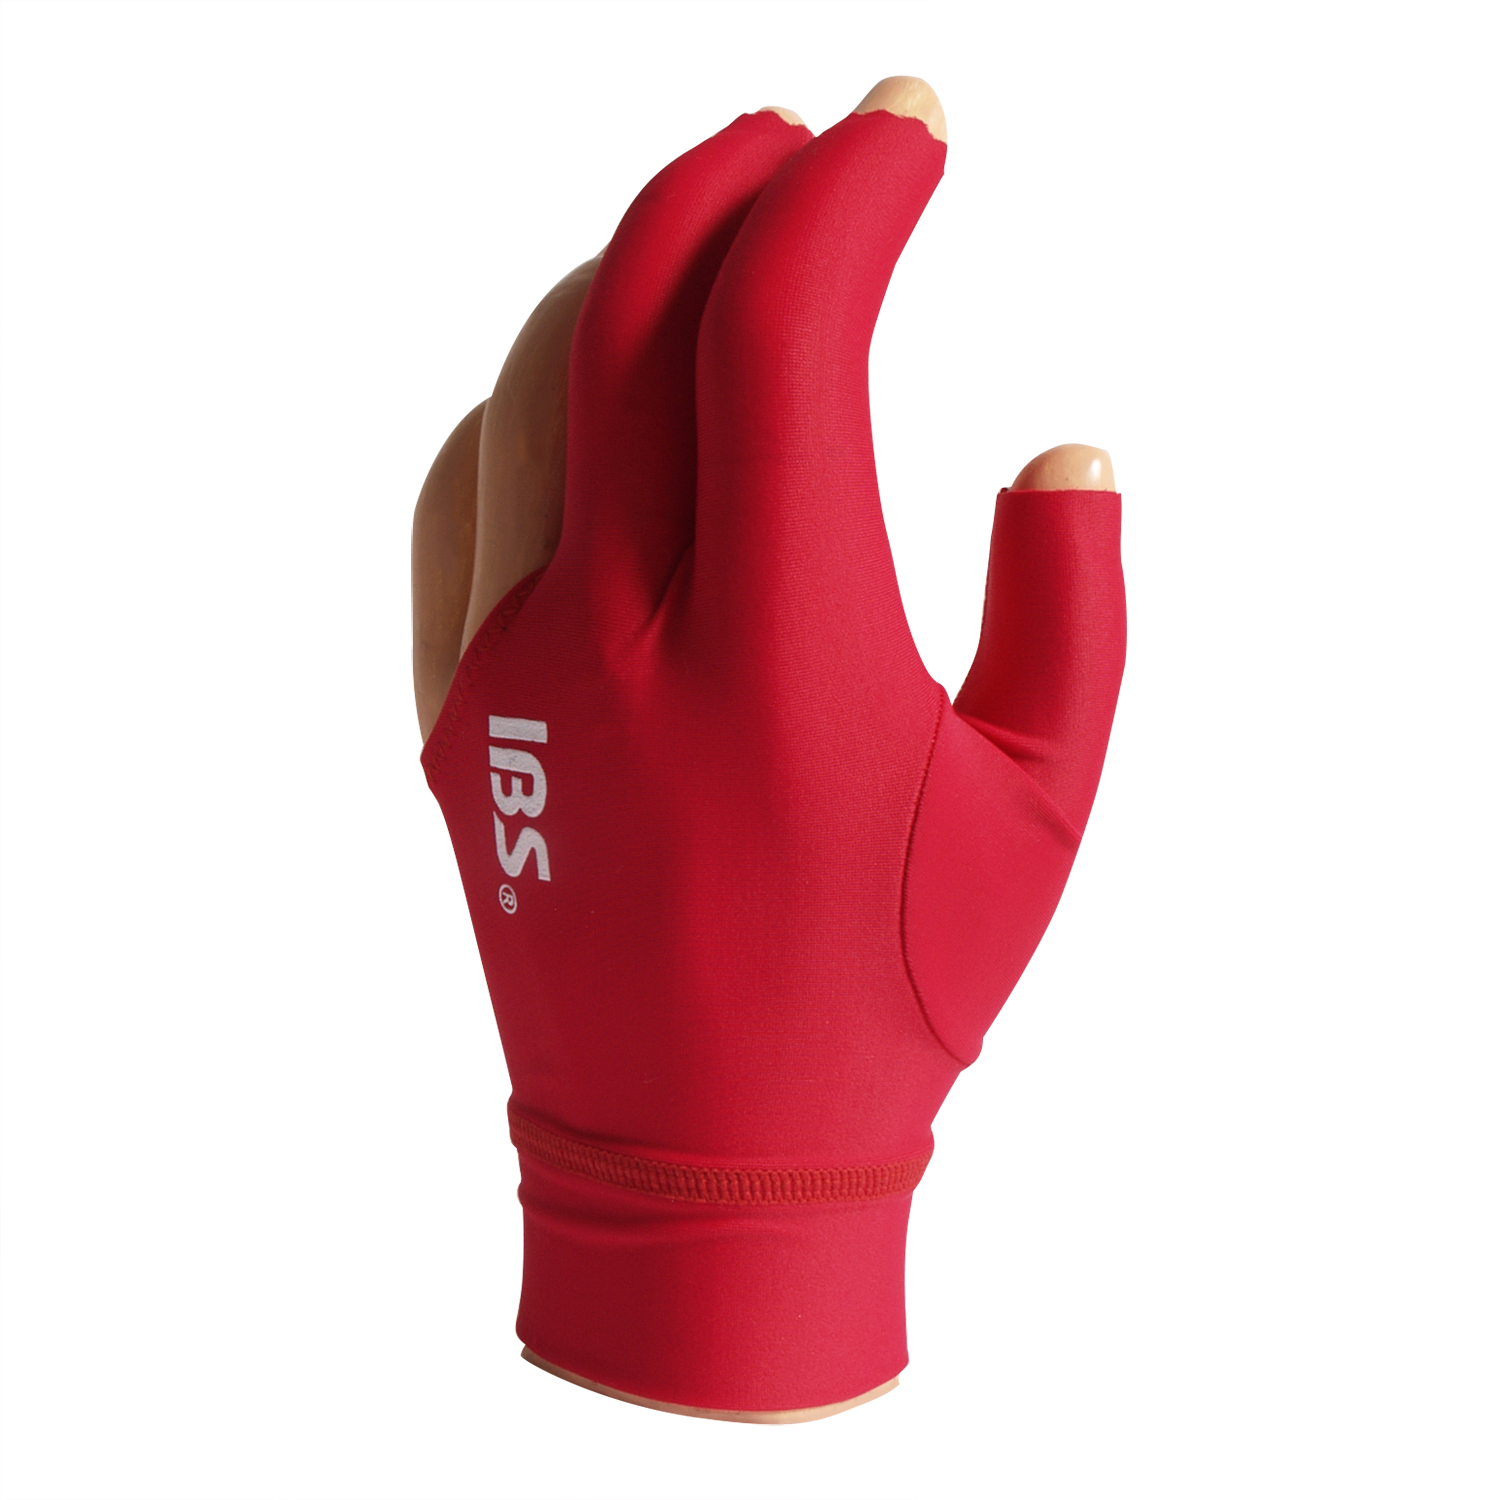 IBS billiard glove Pro clear red one size